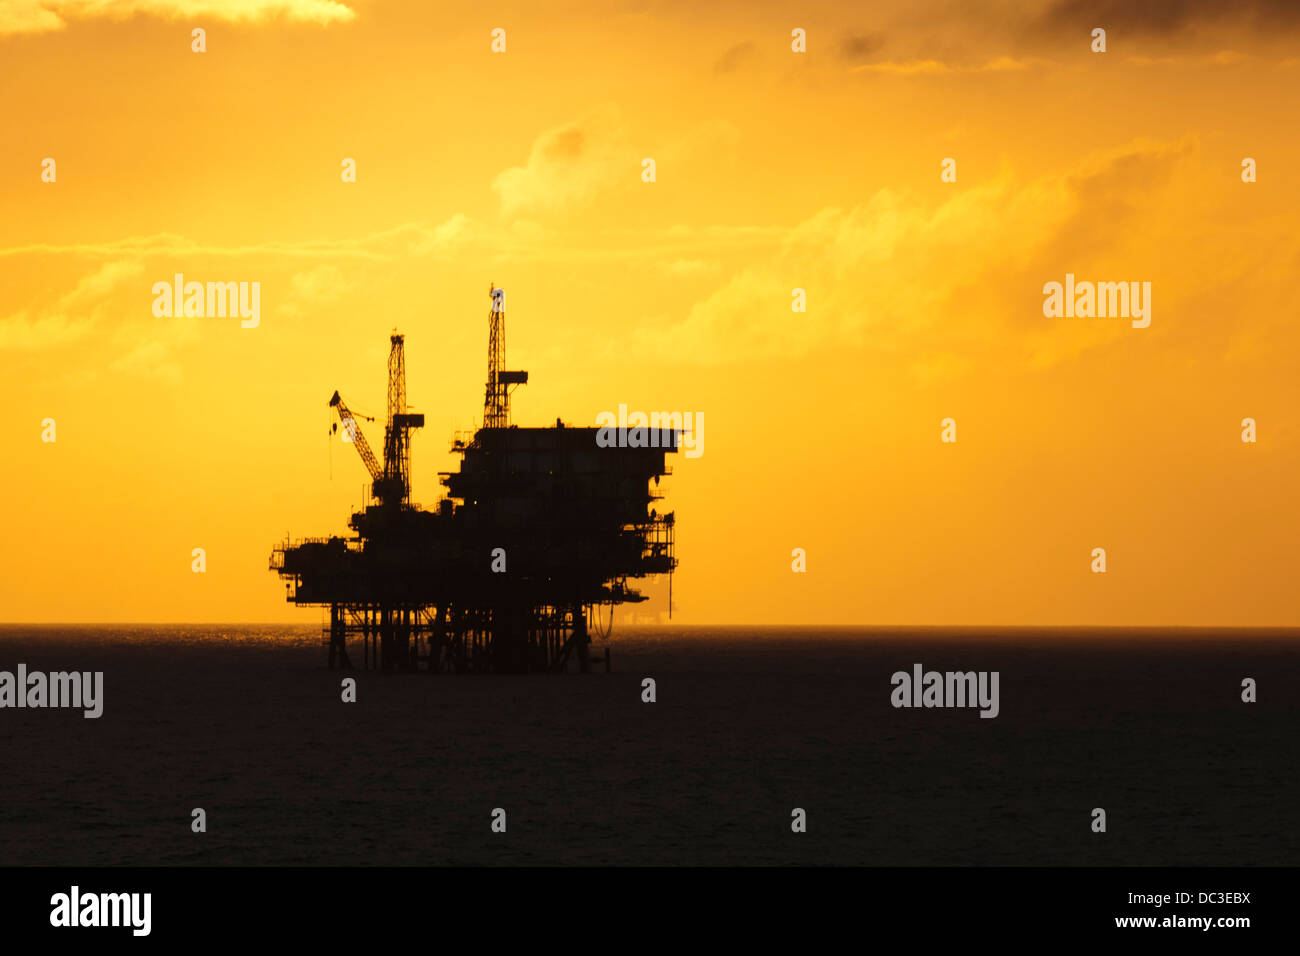 Silhouette of an offshore oil rig far on the horizon at sunset/sunrise time. Stock Photo